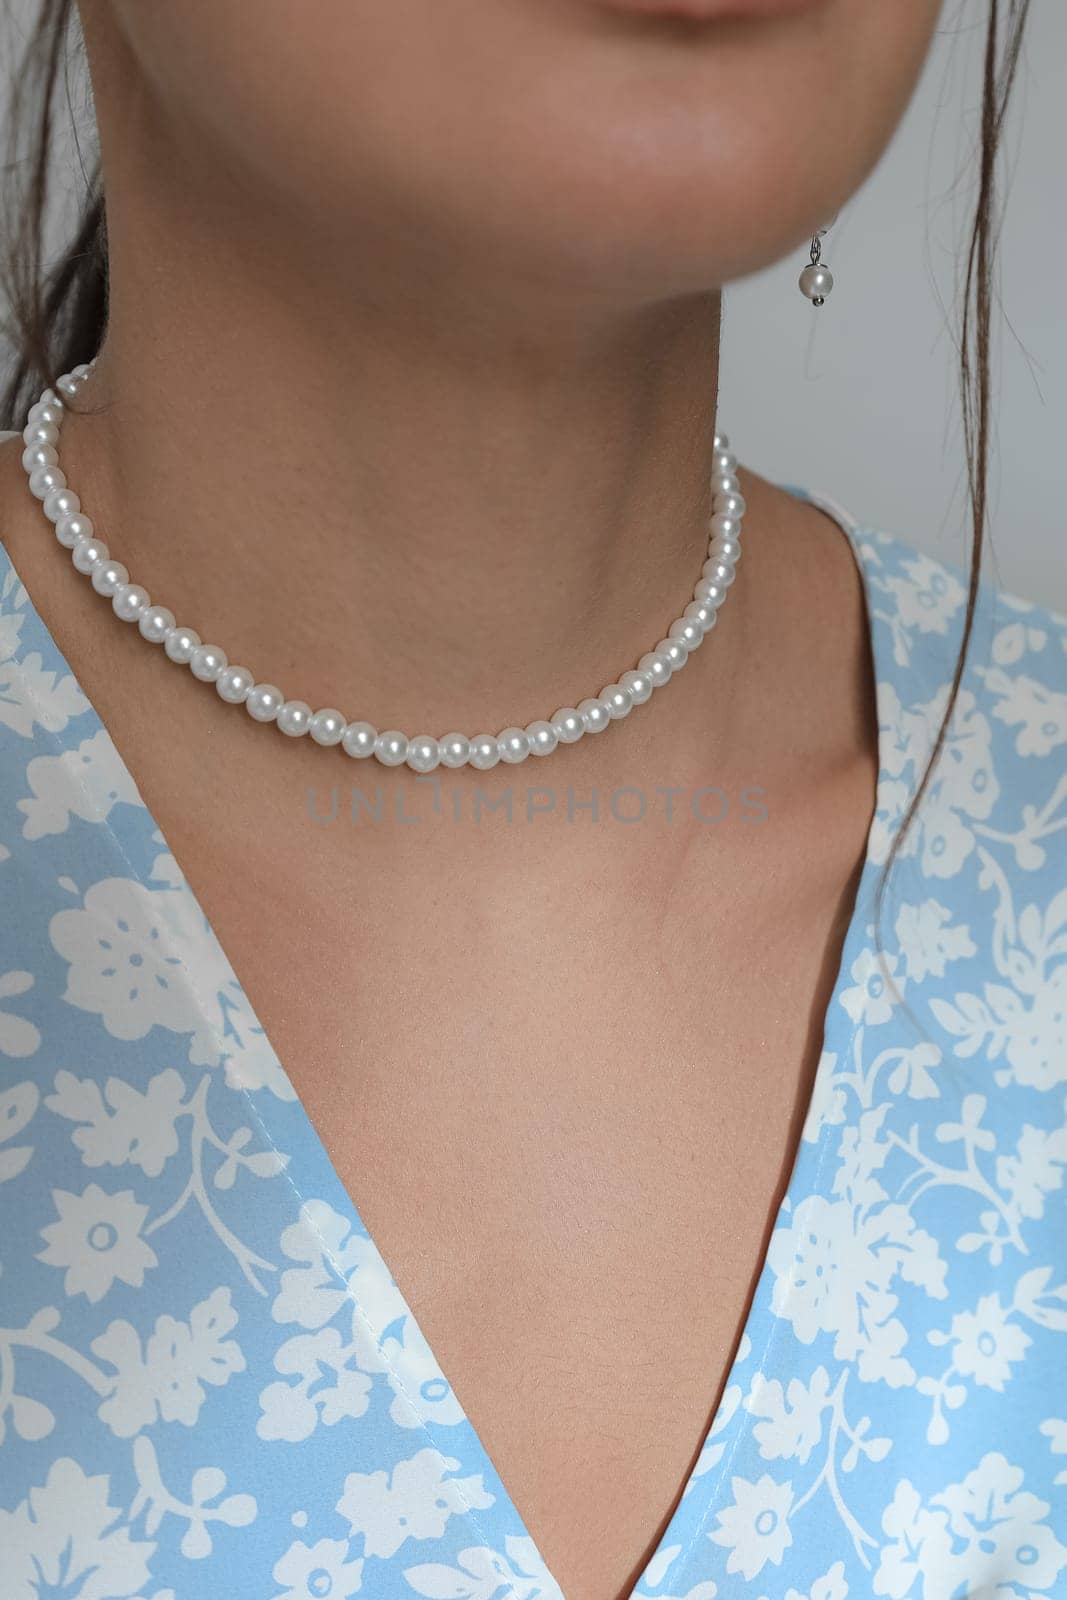 A vertical closeup of a pearl necklace around a Caucasian female's neck by A_Karim